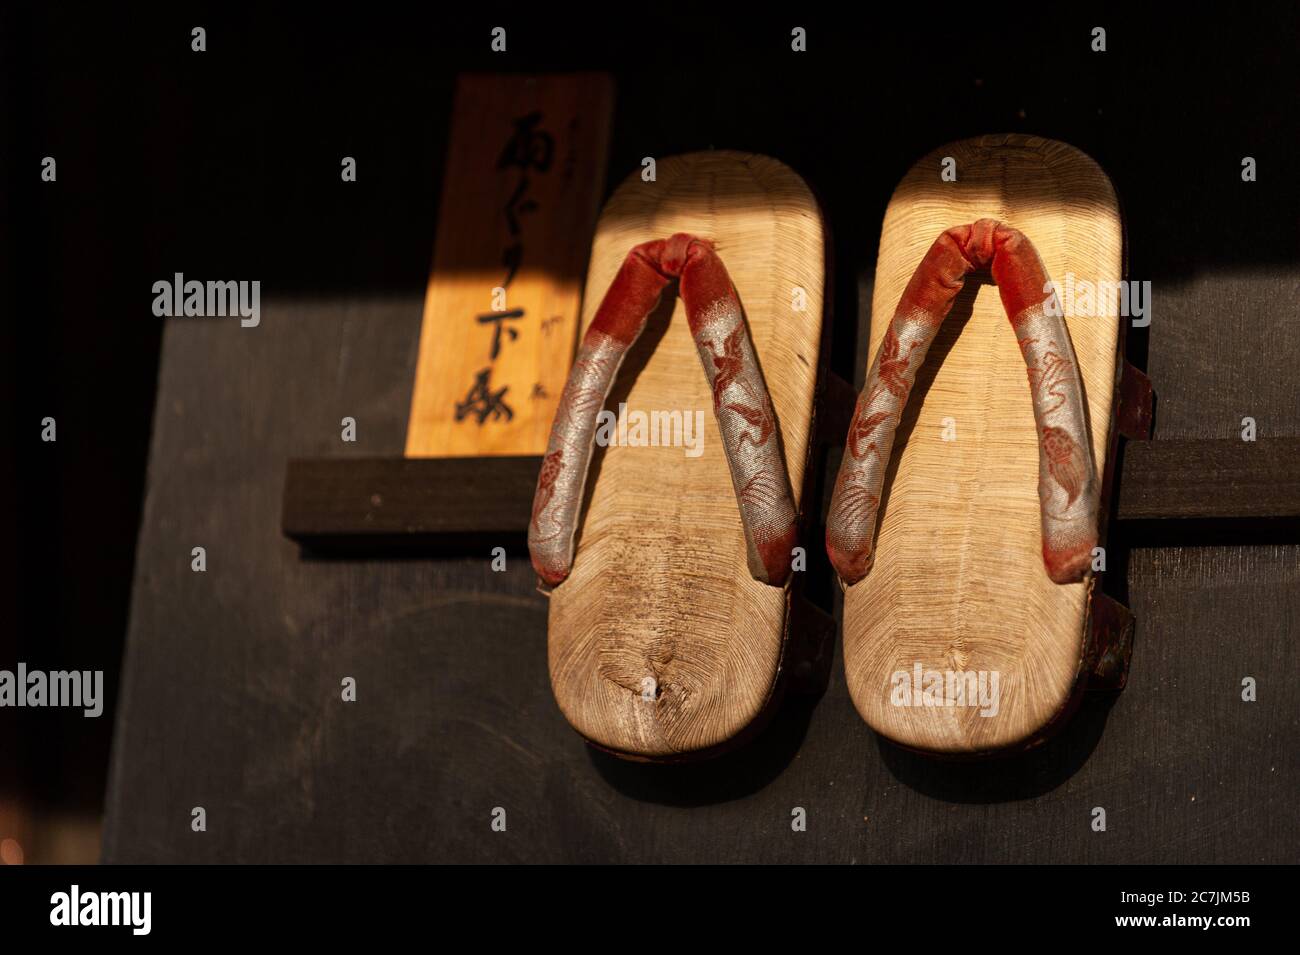 Traditional Japanese wooden shoes for sale in souvenir shops, Geta is a shoe  that we often see Japanese people wear when wearing a yukata or kimono  Stock Photo - Alamy